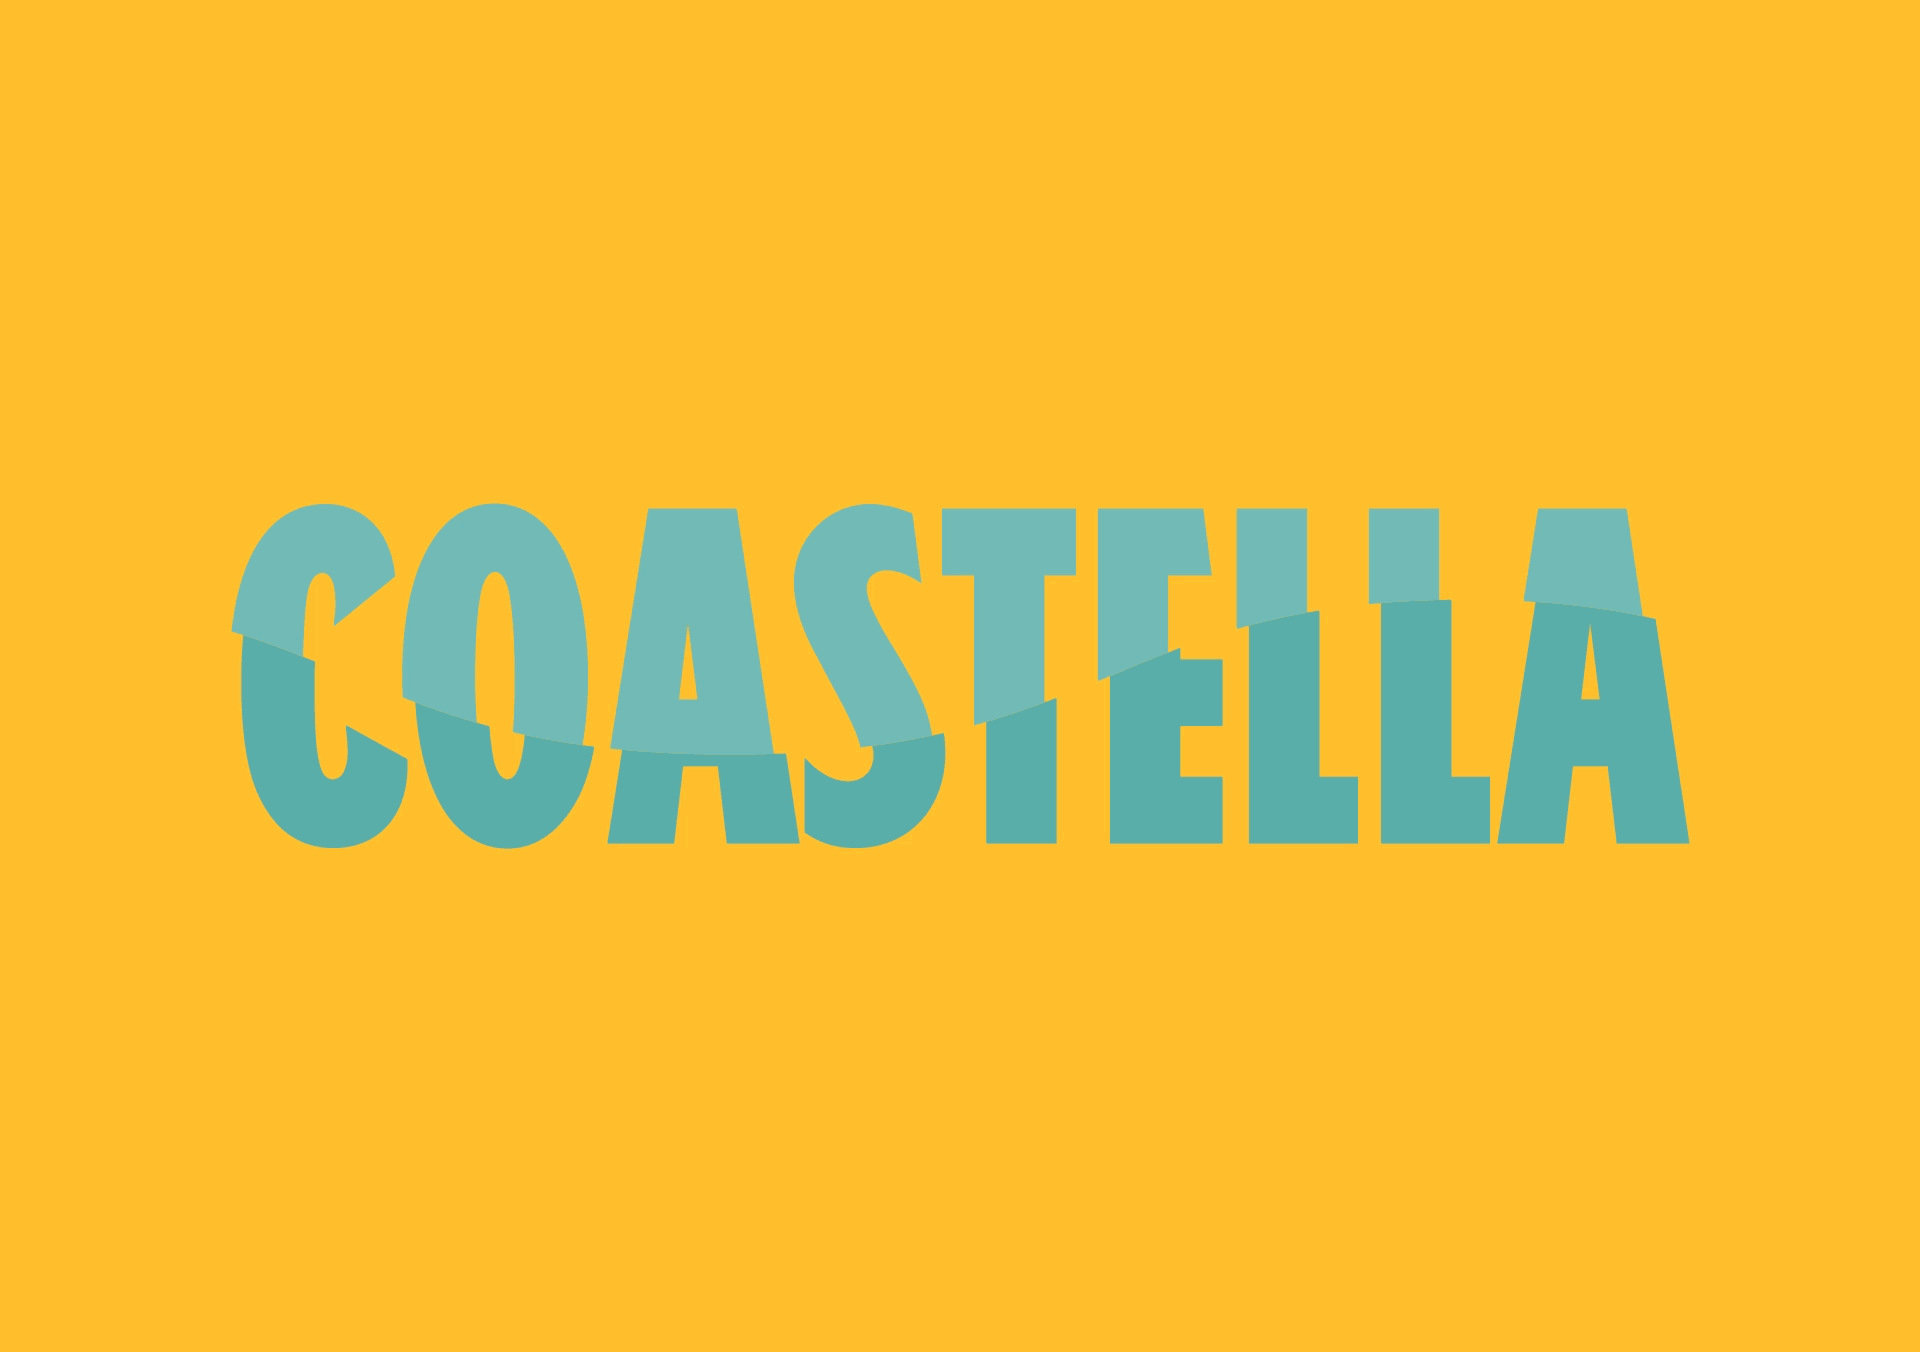  Coastella is Wellington’s biggest indie music festival. The brand concept is ‘Mysterious earworm’. Visuals that get stuck in your head like a good song. Designed with Strategy Creative. 